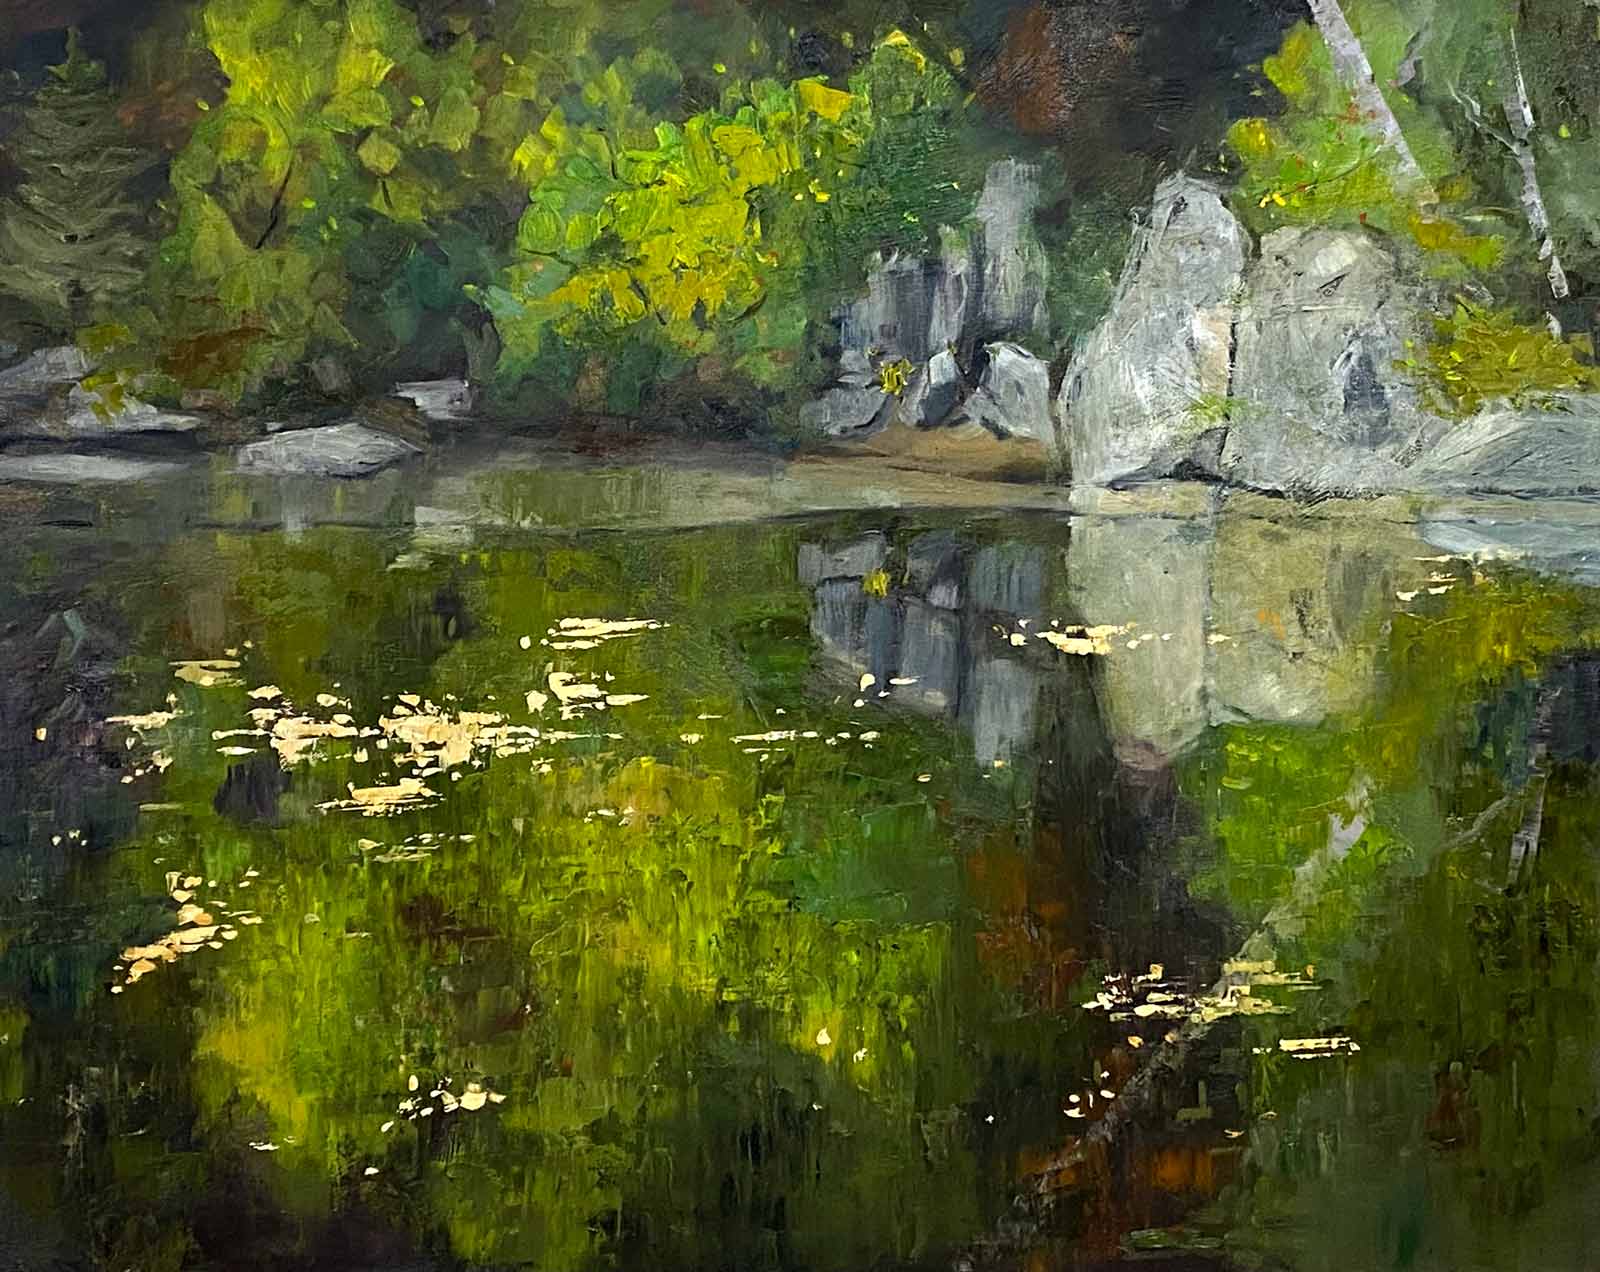 Impressionistic oil painting in greens of reflections on still water, by Texas impressionist artist, Shelly Wierzba